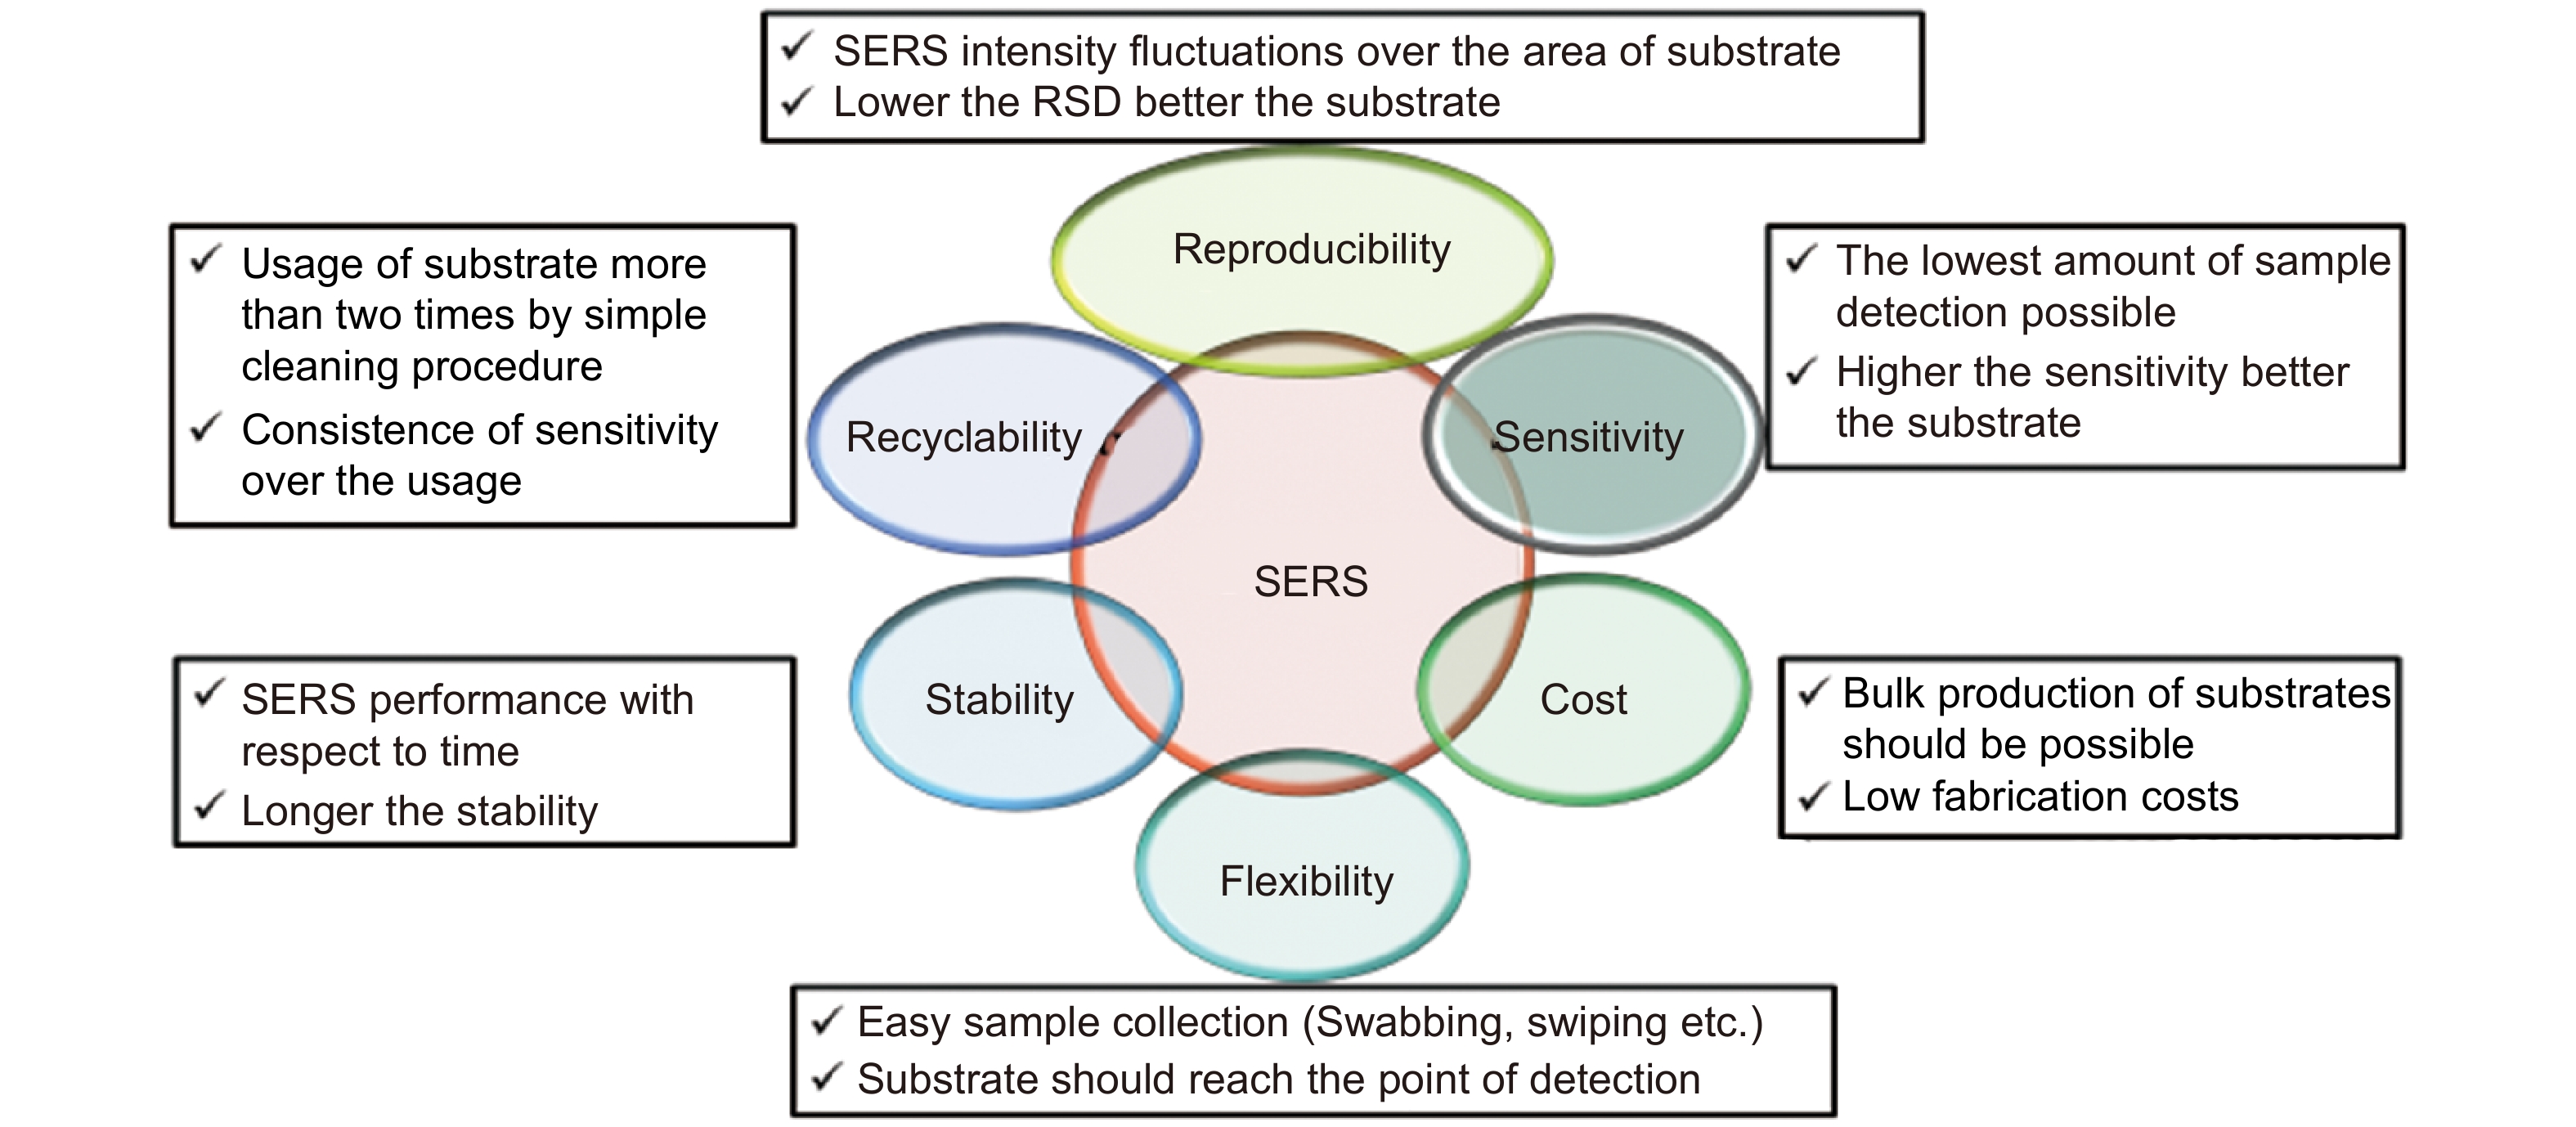 The ideal requirements of SERS substrates are summarized in this schematic.